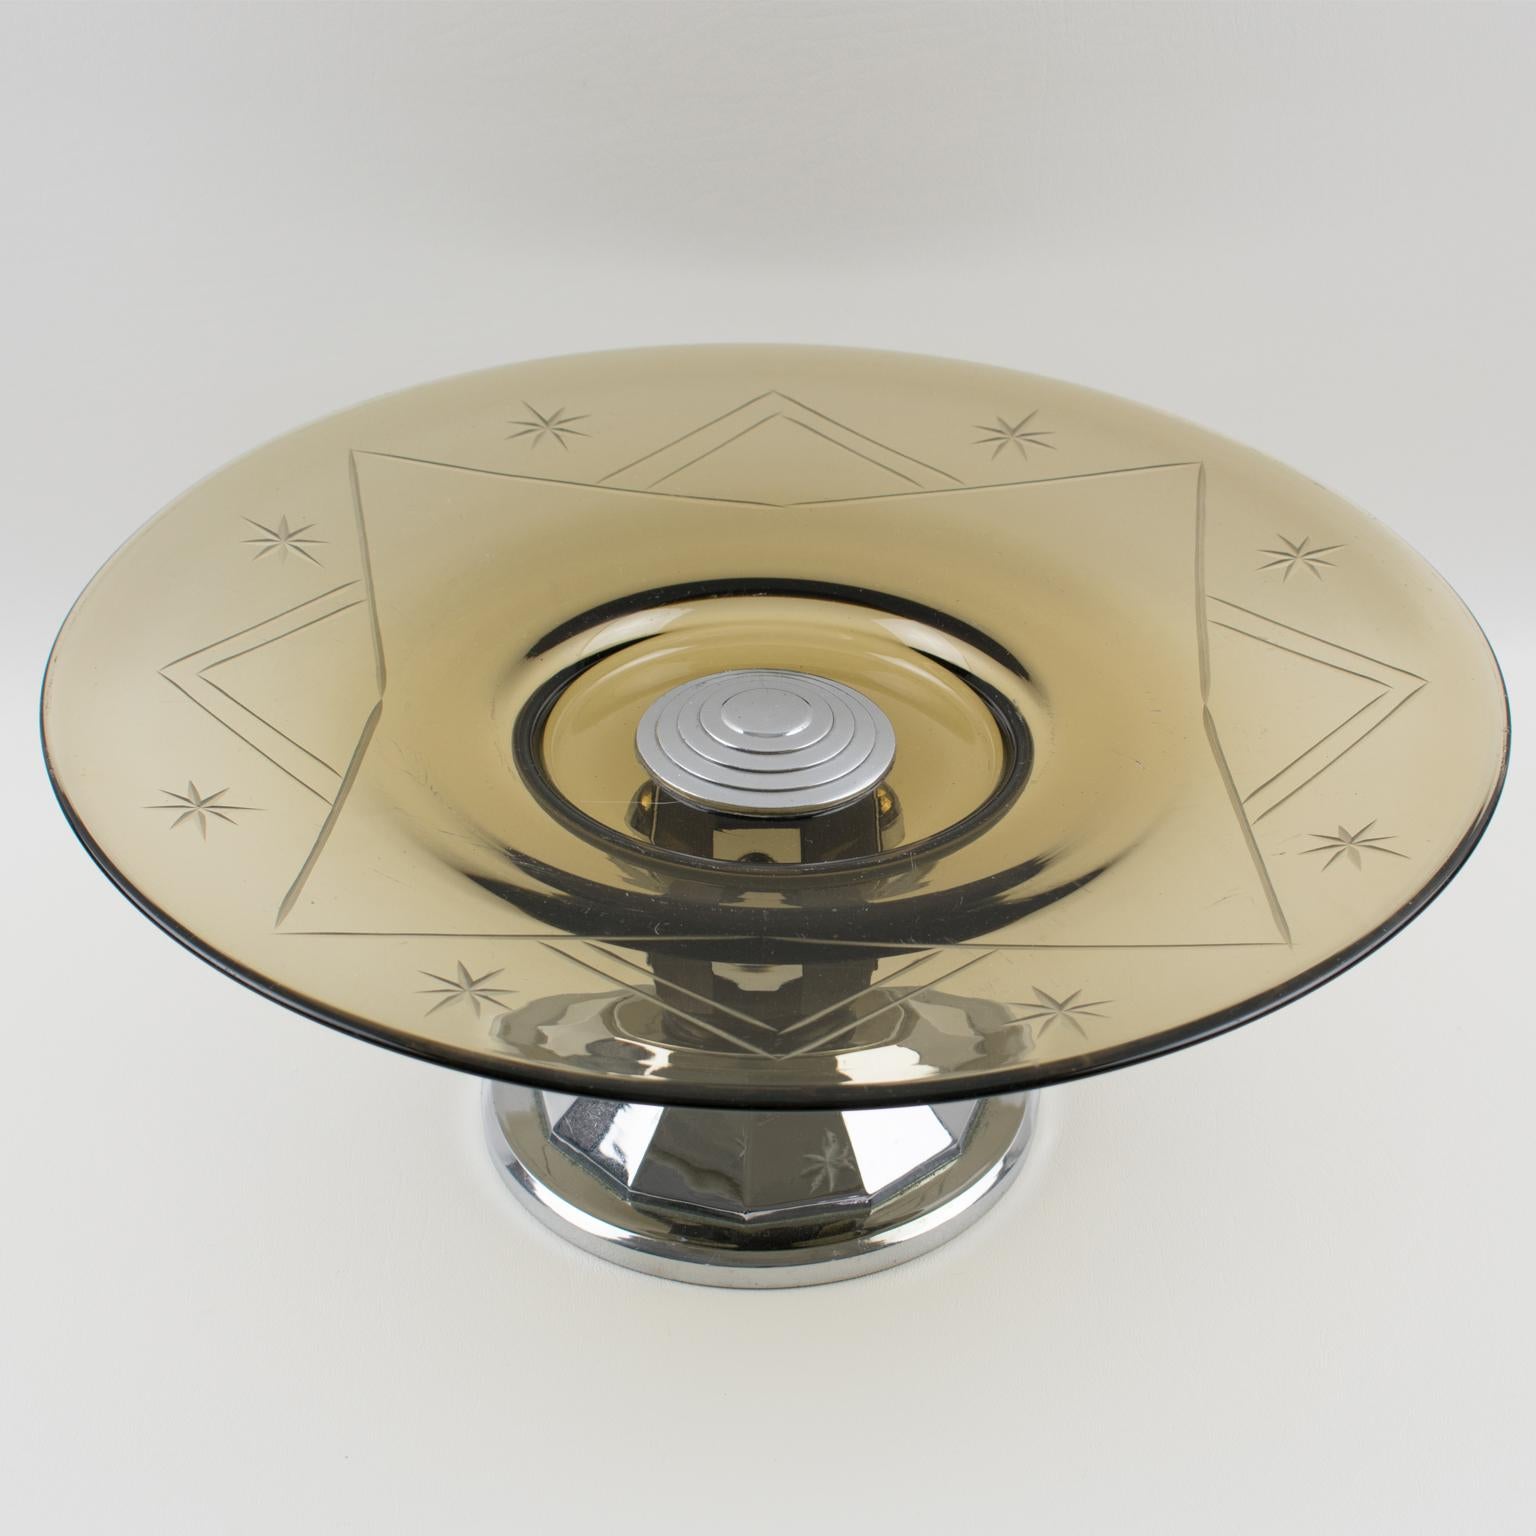 This stylish French Art Deco modernist decorative centerpiece or serving bowl features a large round glass bowl with an etched pattern in lovely transparent smoke gray color. The pedestal base is in chromed metal and Macassar wood with a unique